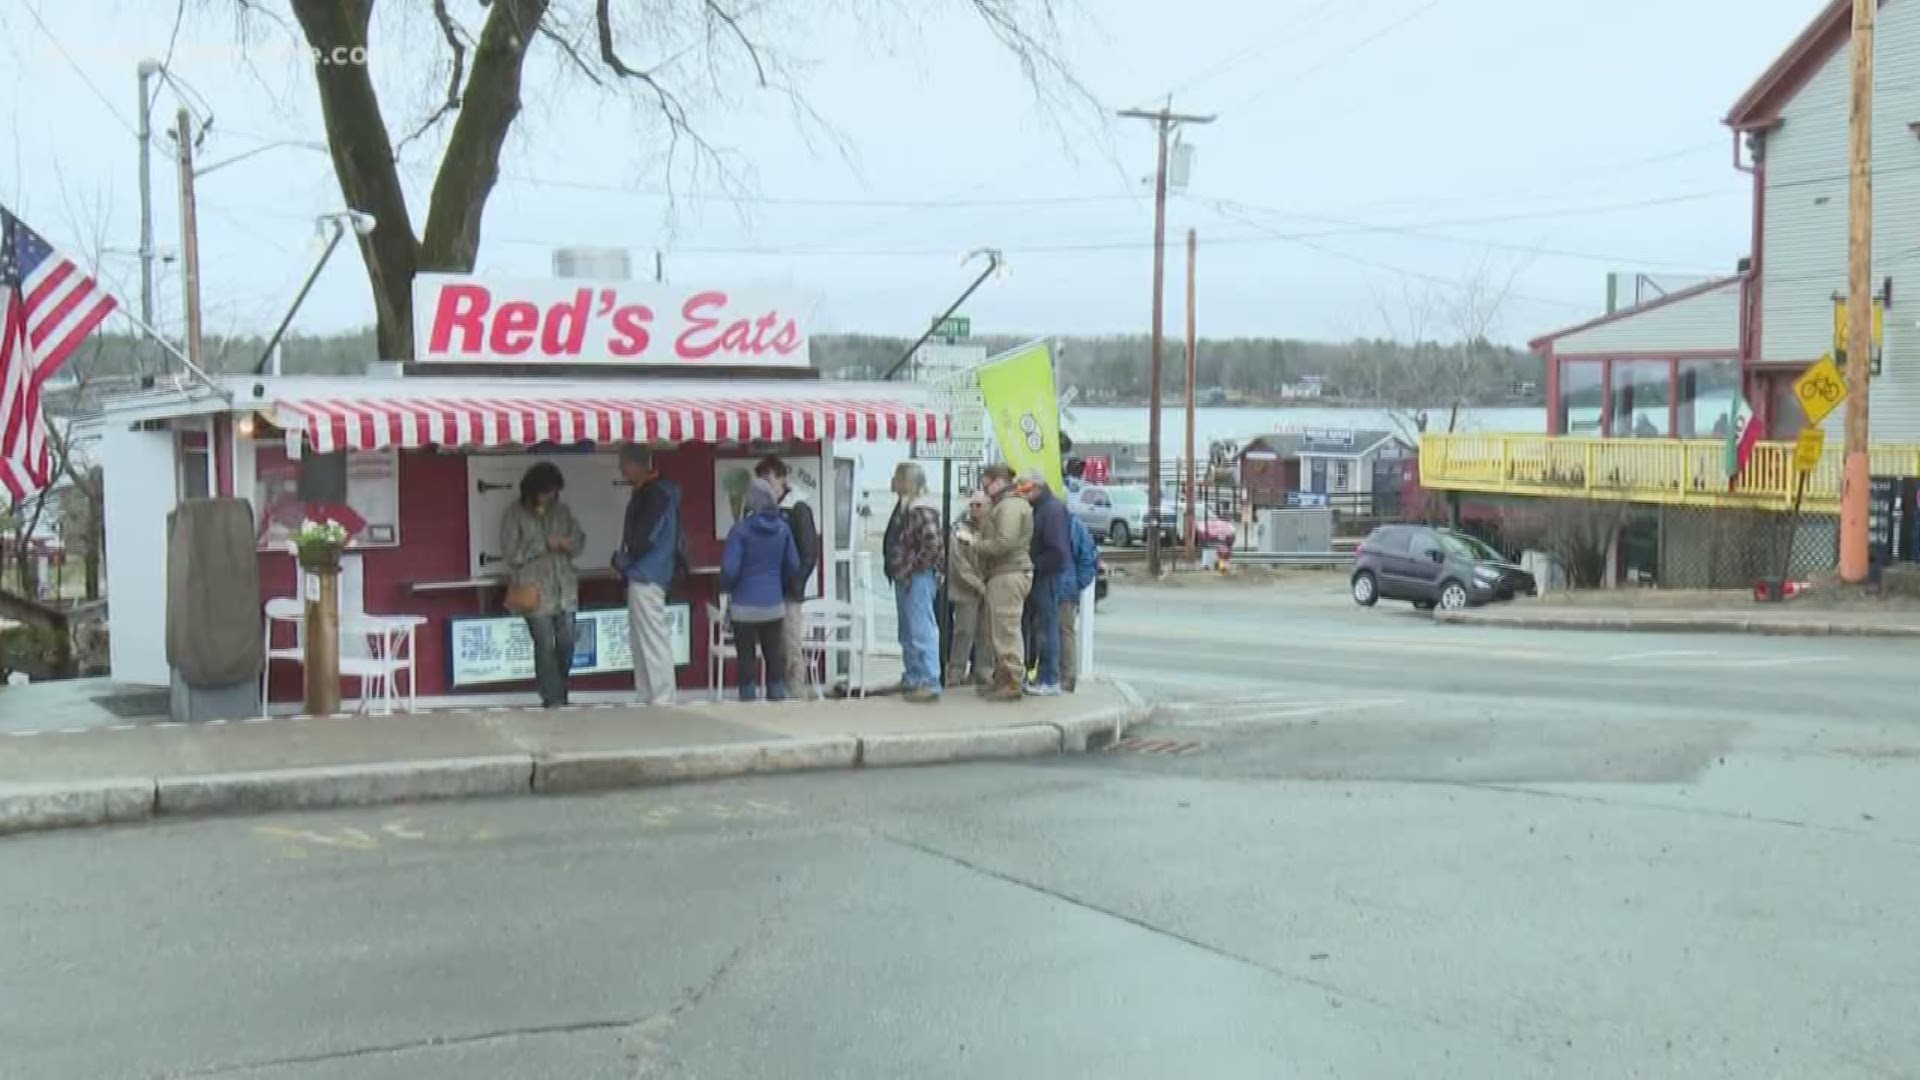 Locals and tourists lined up at Red's Eats in Wiscasset for opening day on Monday.